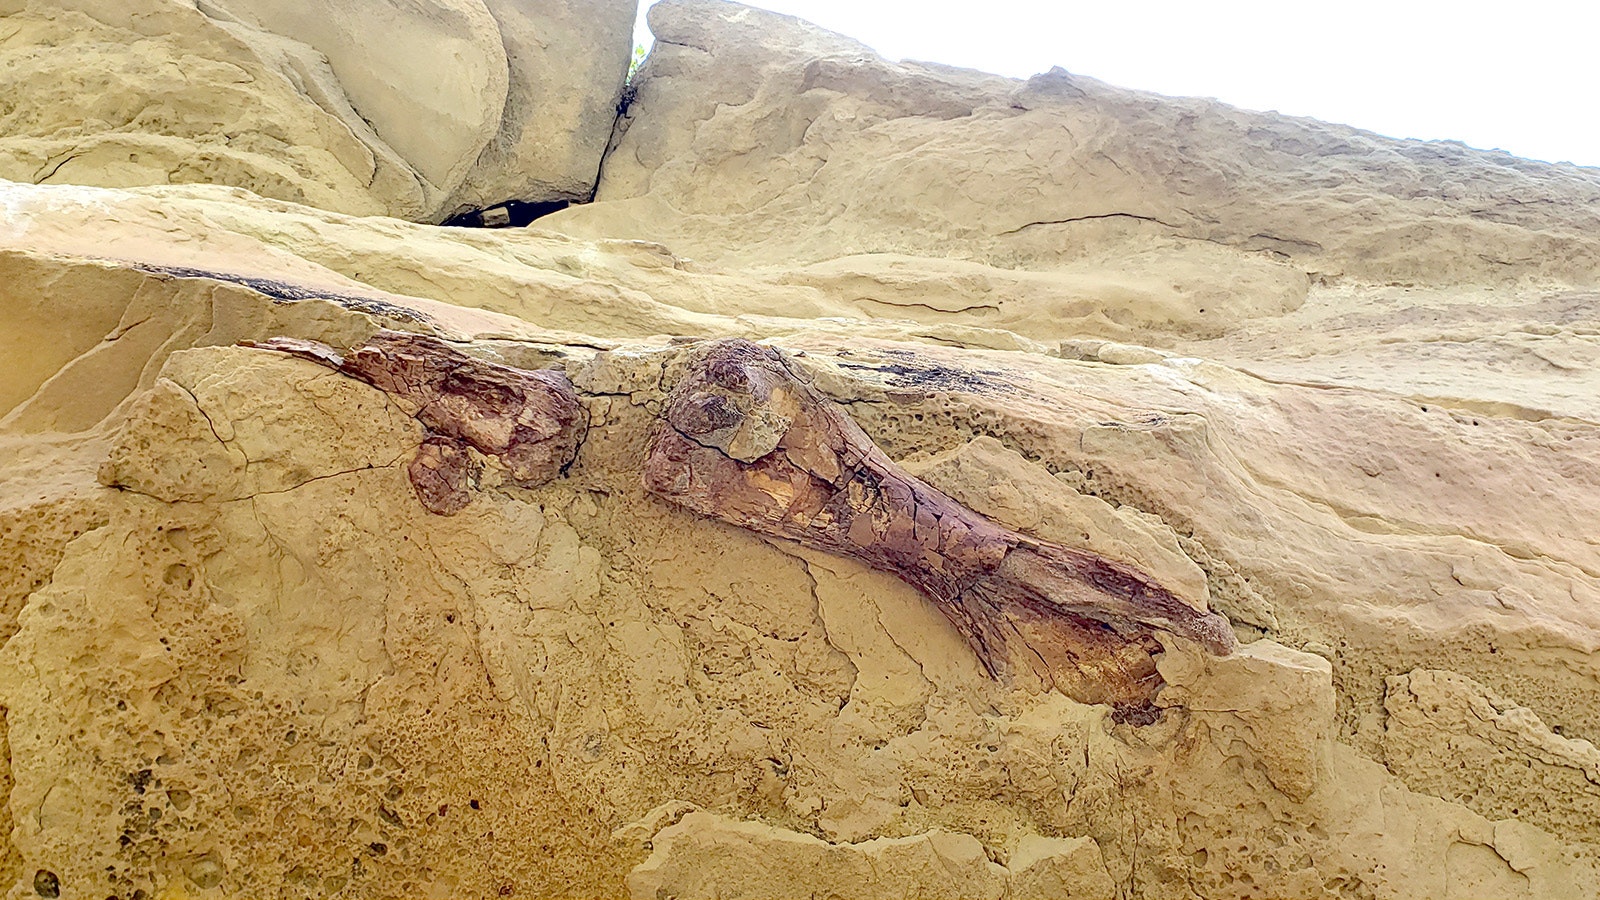 These dinosaur bones lie overhead beneath a ledge that's accessed by walking single-file along a narrow ledge below.